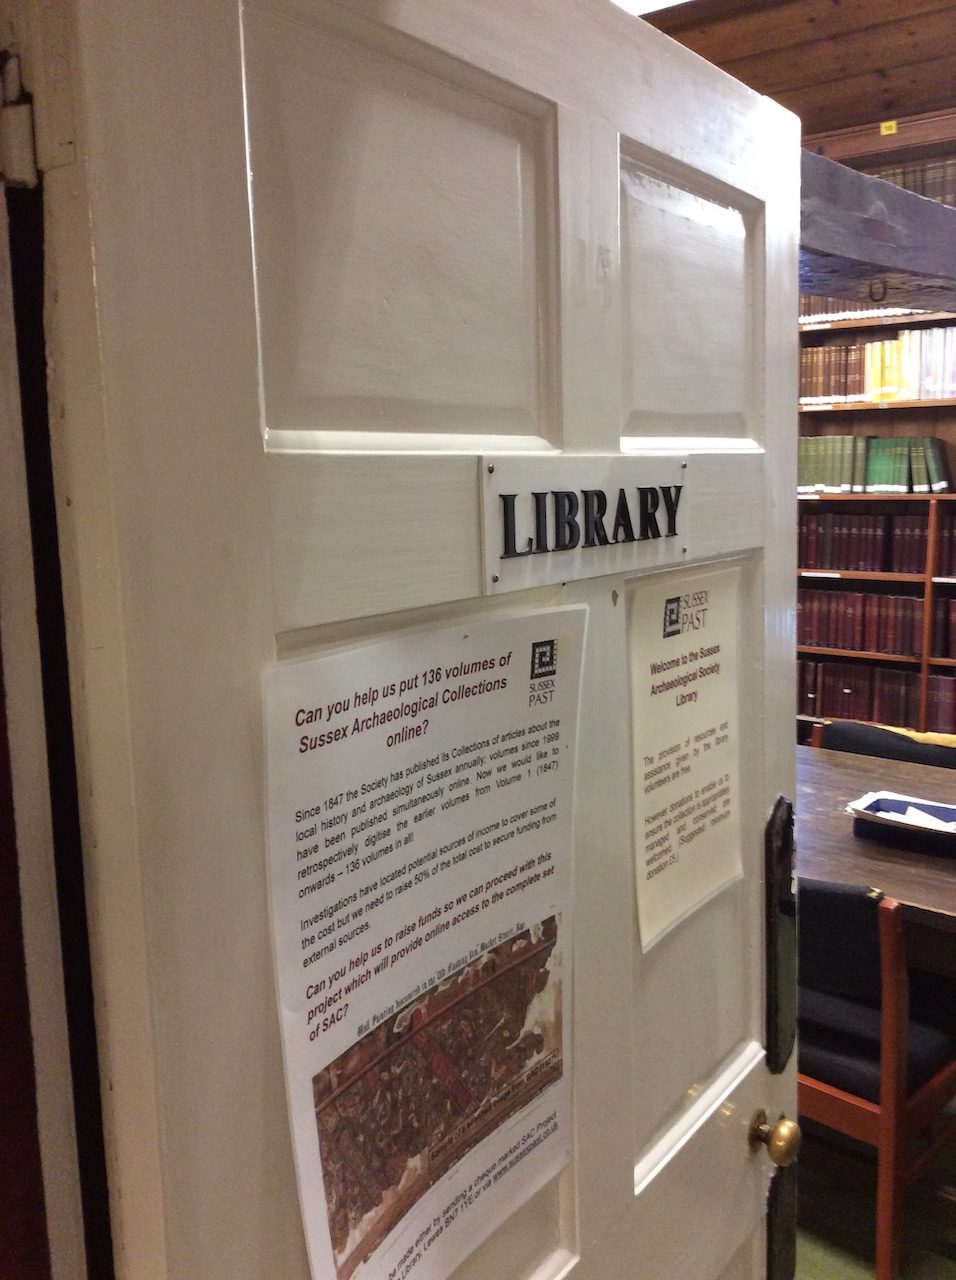 The Sussex Archaeological Society library.